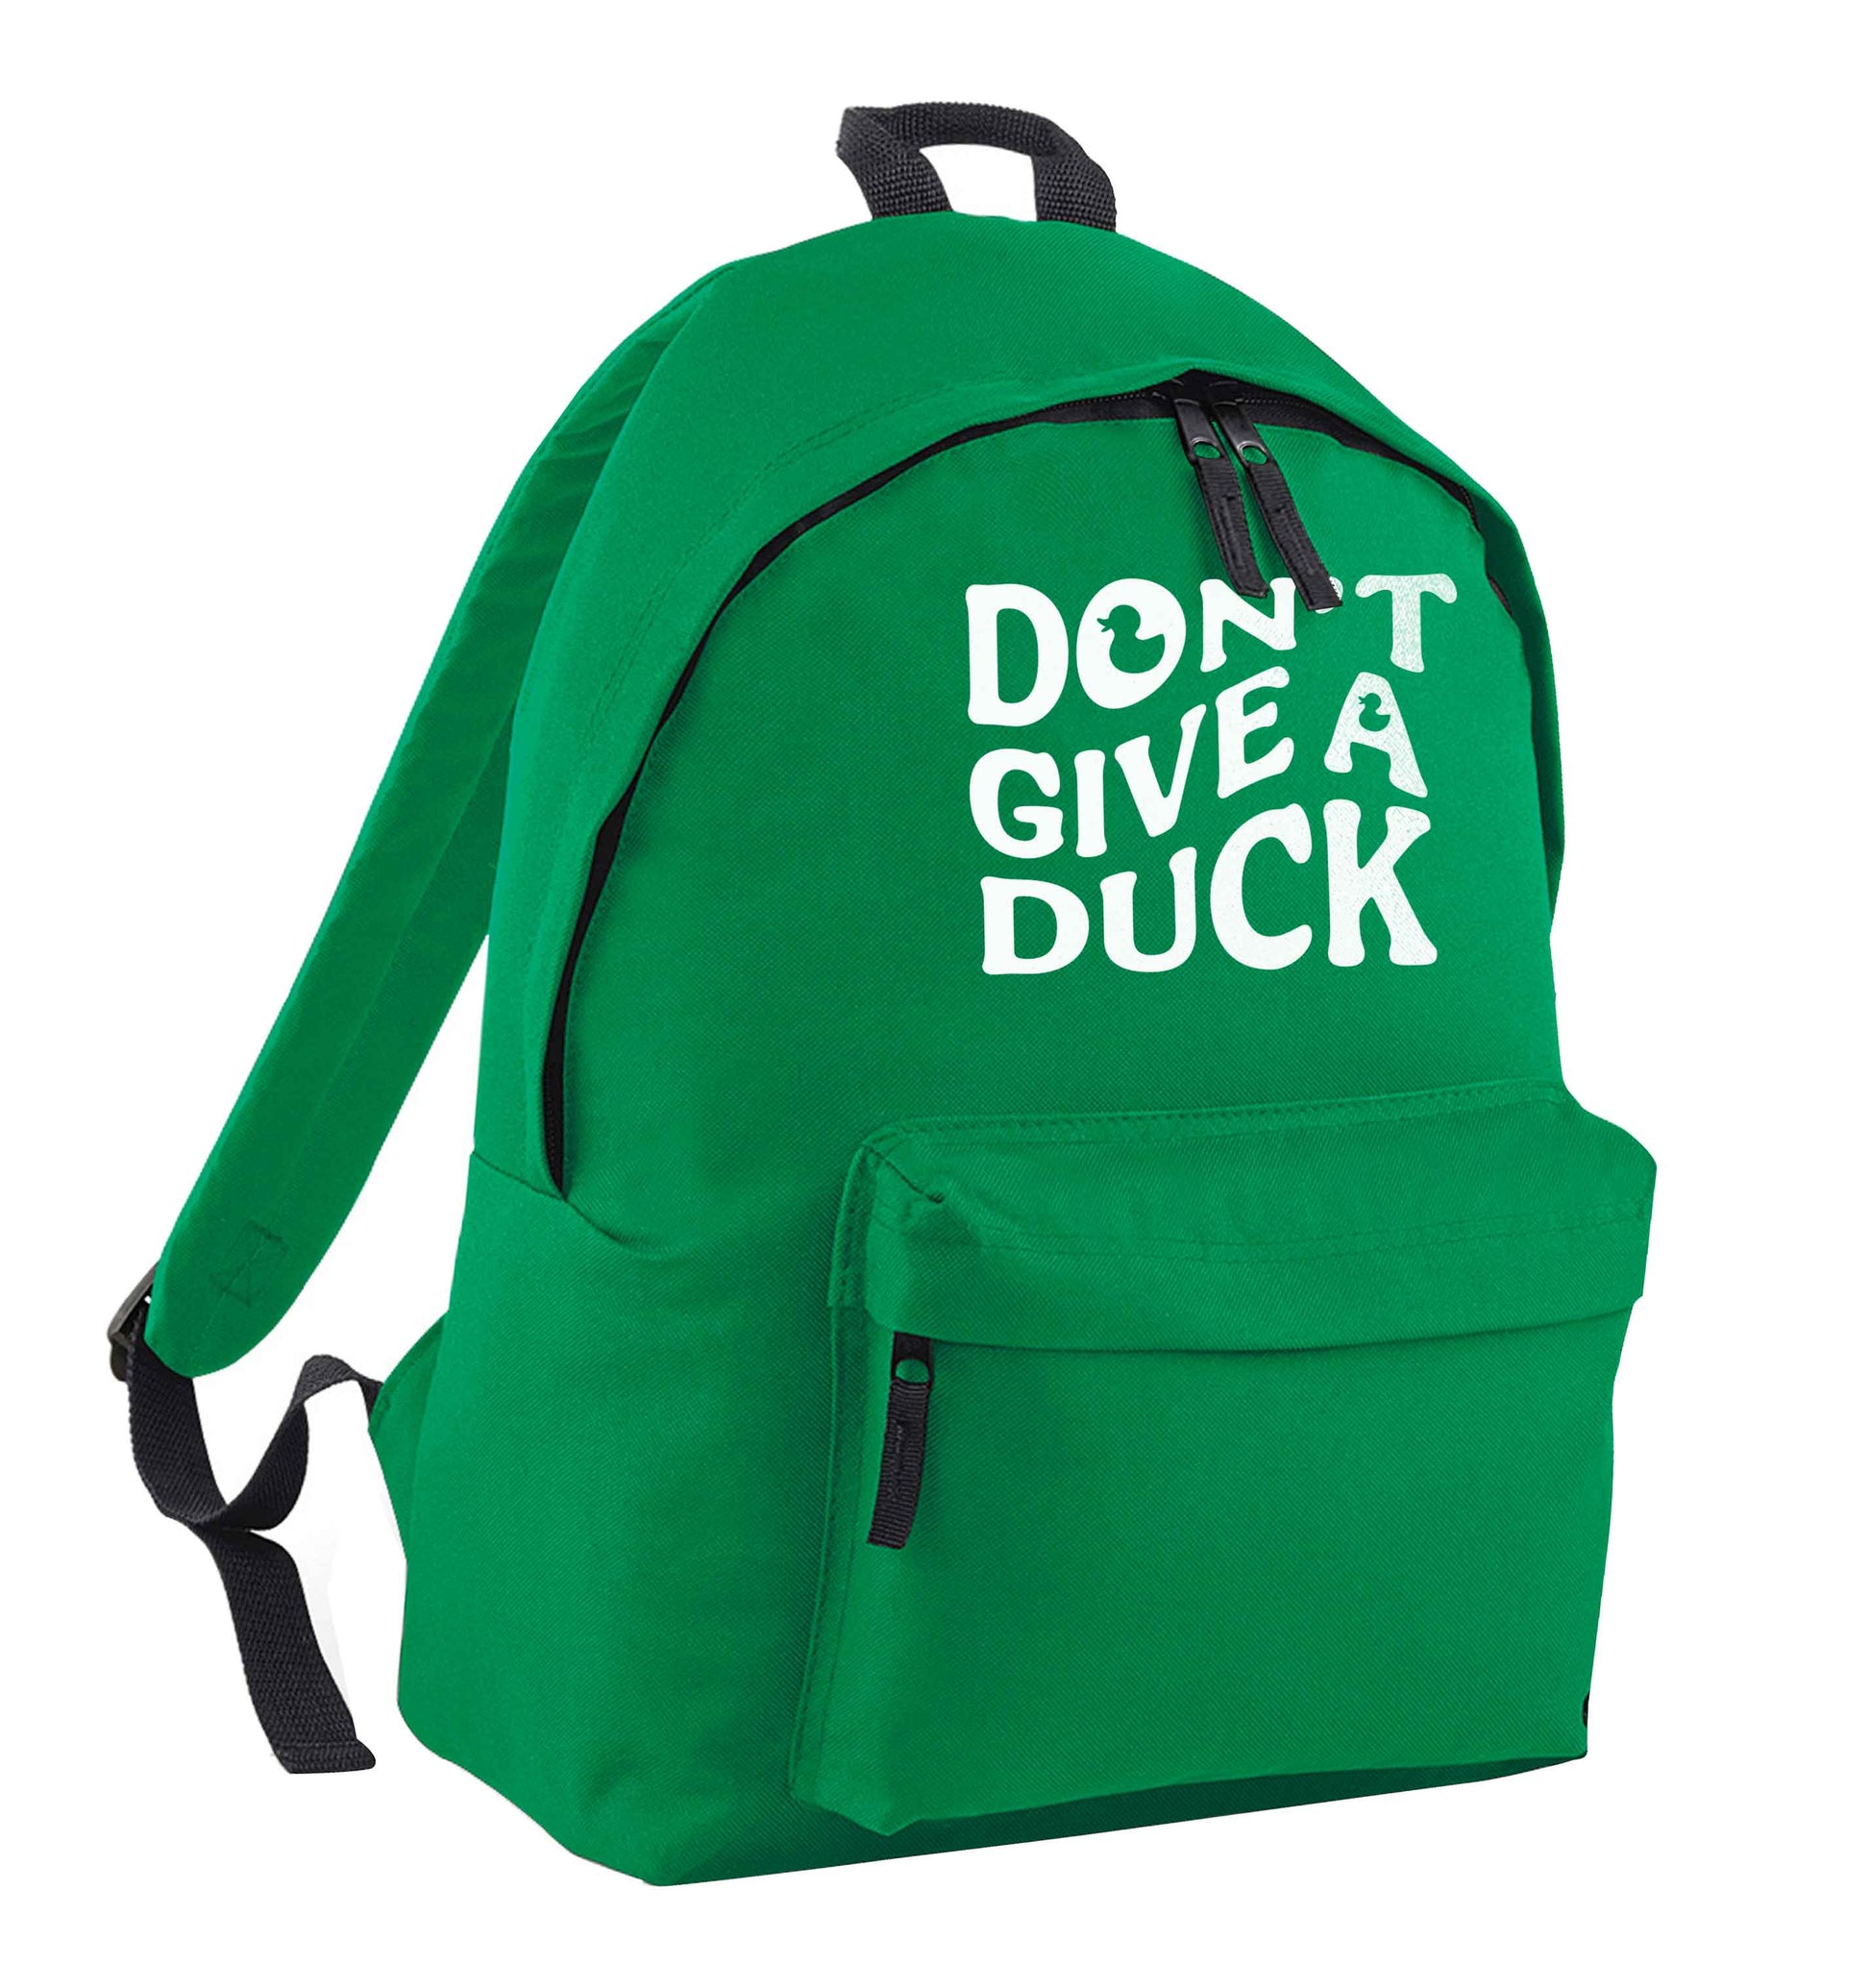 Don't give a duck green adults backpack